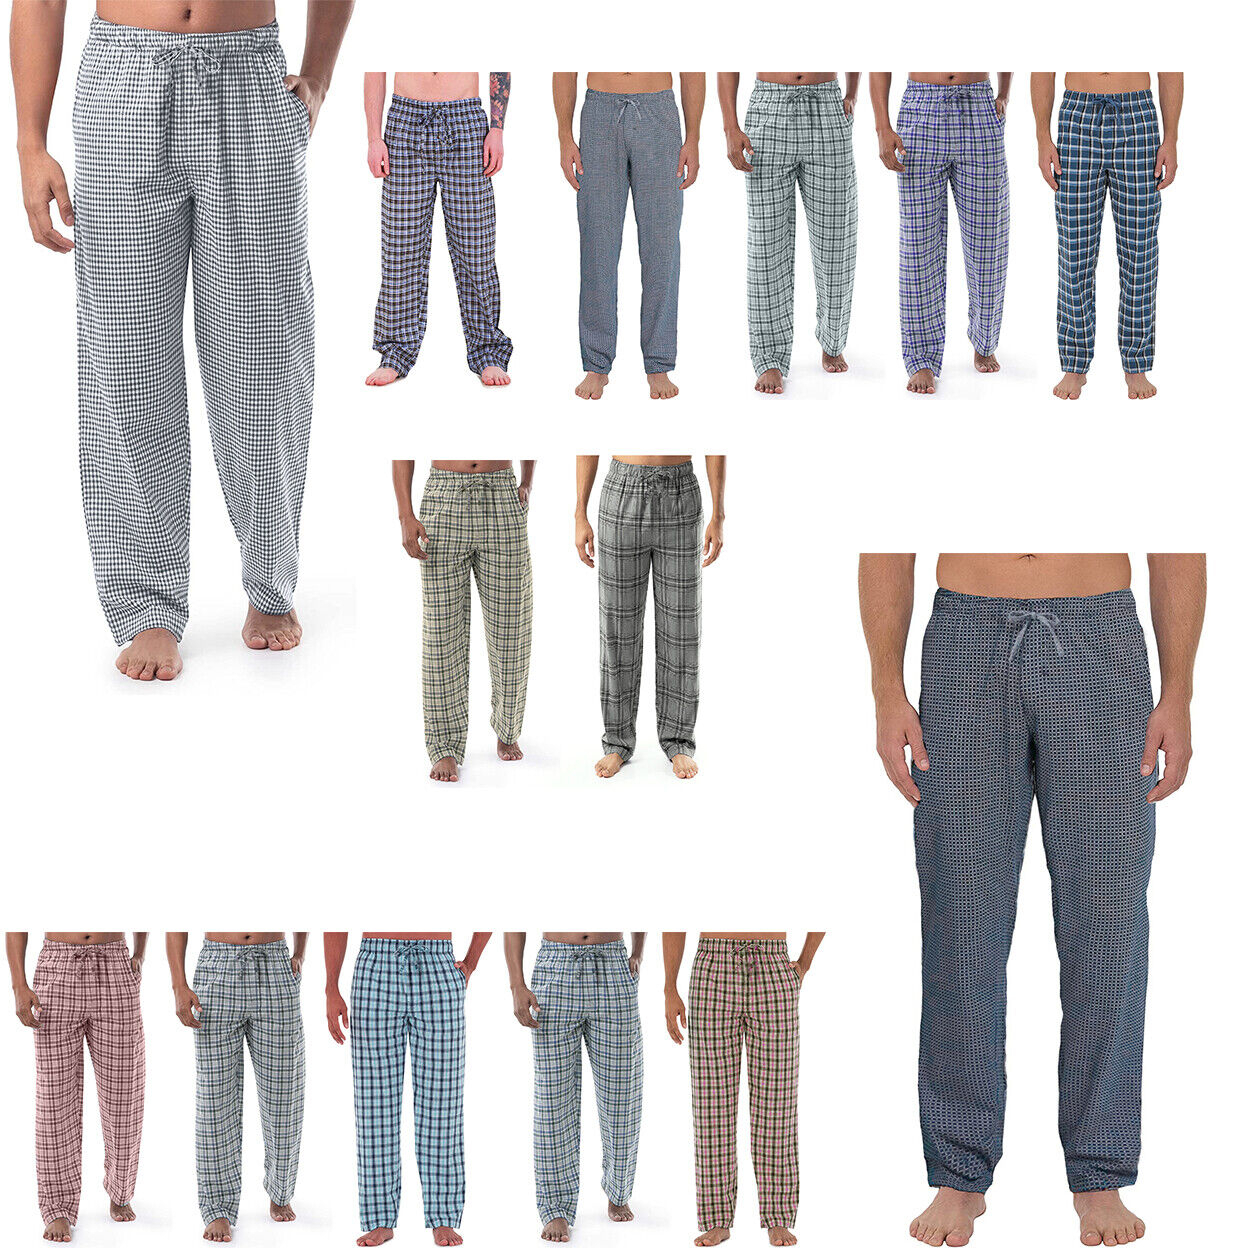 Multi-Pack: Men's Ultra-Soft Solid & Plaid Cotton Jersey Knit Comfy Sleep Lounge Pajama Pants - 3-pack Plaid, Small